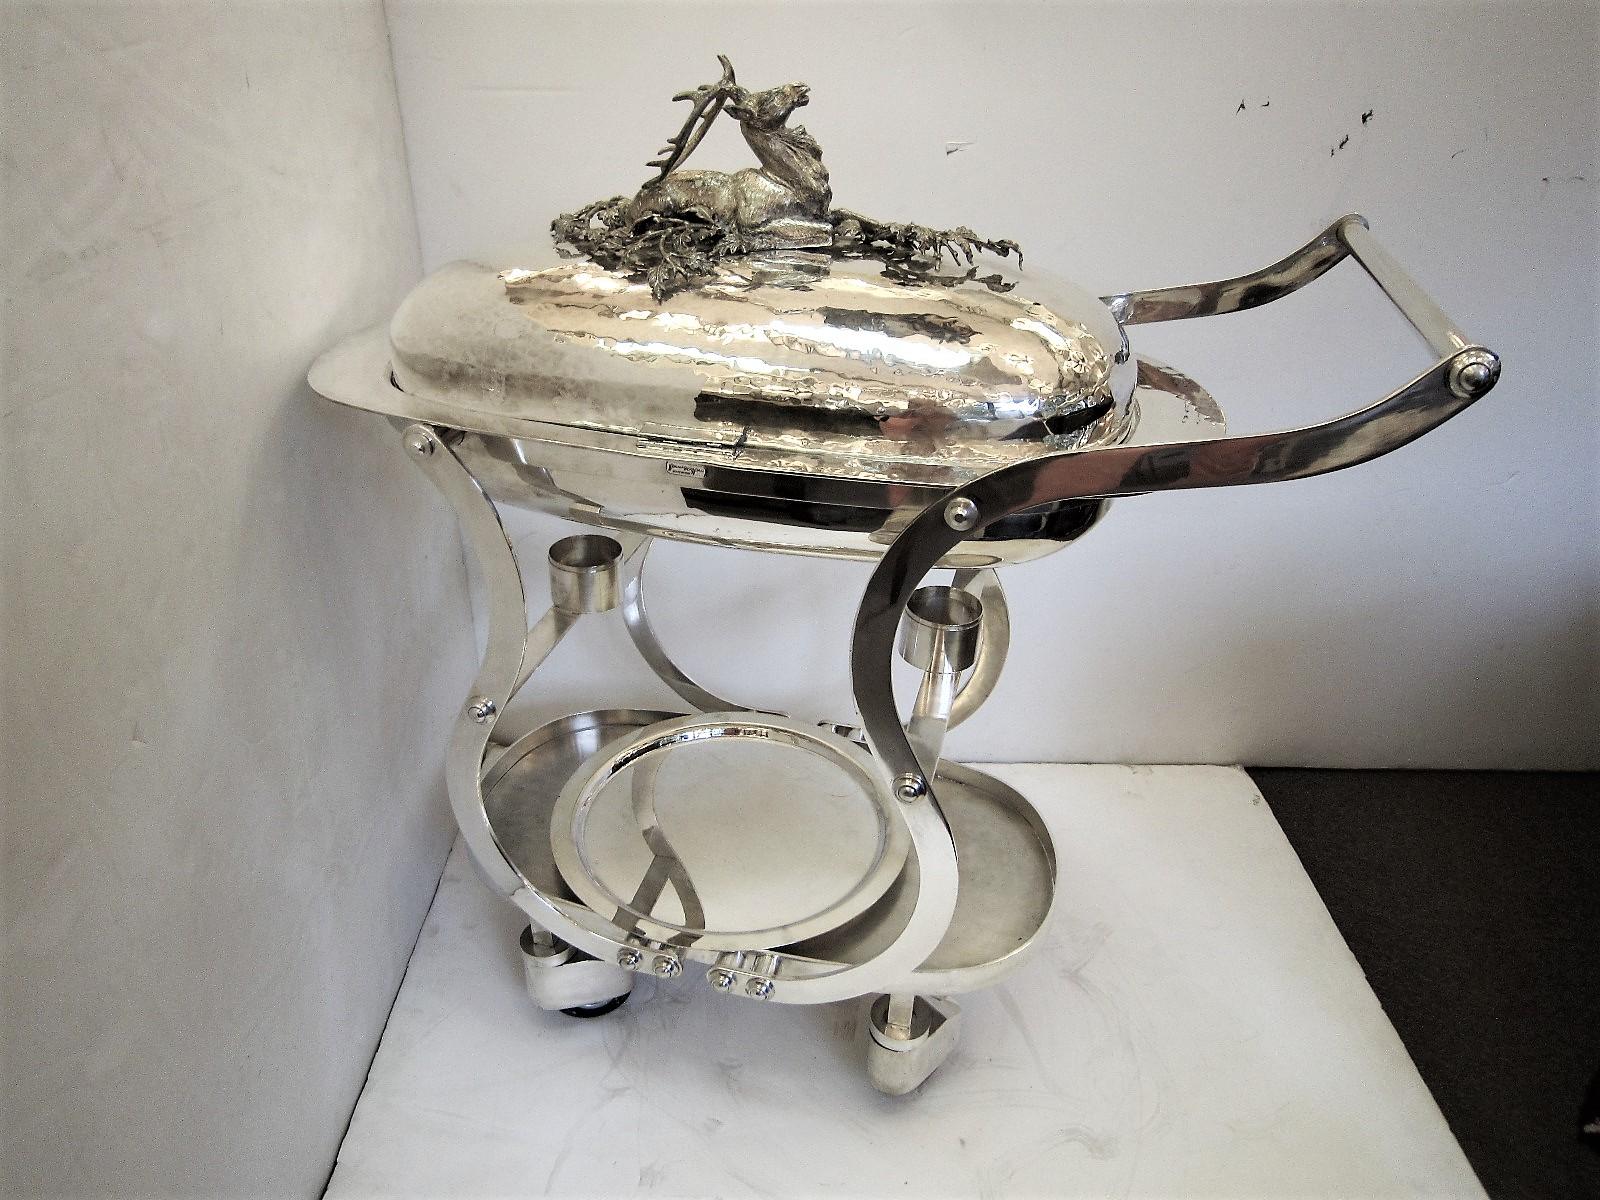 Fabulous Italian oval rolling kitchen with hot water container. Handmade and hand hammered silver plated metal with deer/ elk decoration atop lid, signed Franco Lapini
Can be used for as a serving trolly, for hospitality, a hunting lodge, dining,